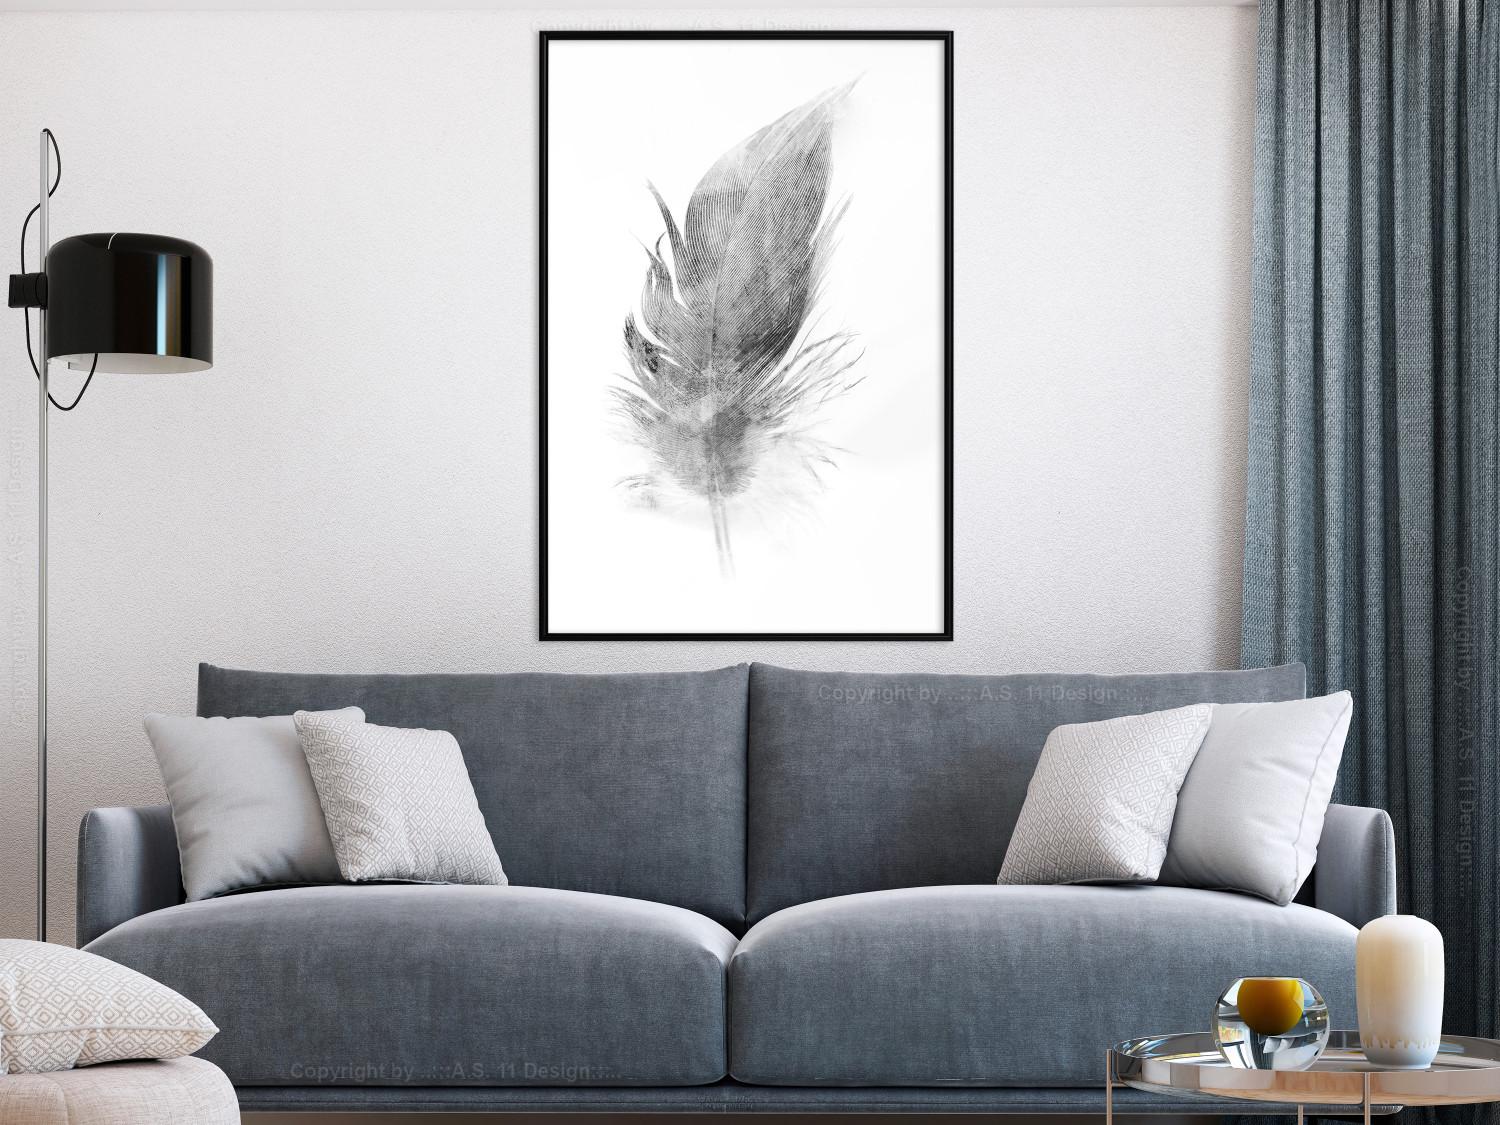 Gallery wall Fleeting - black sketch of a bird feather on contrasting white background